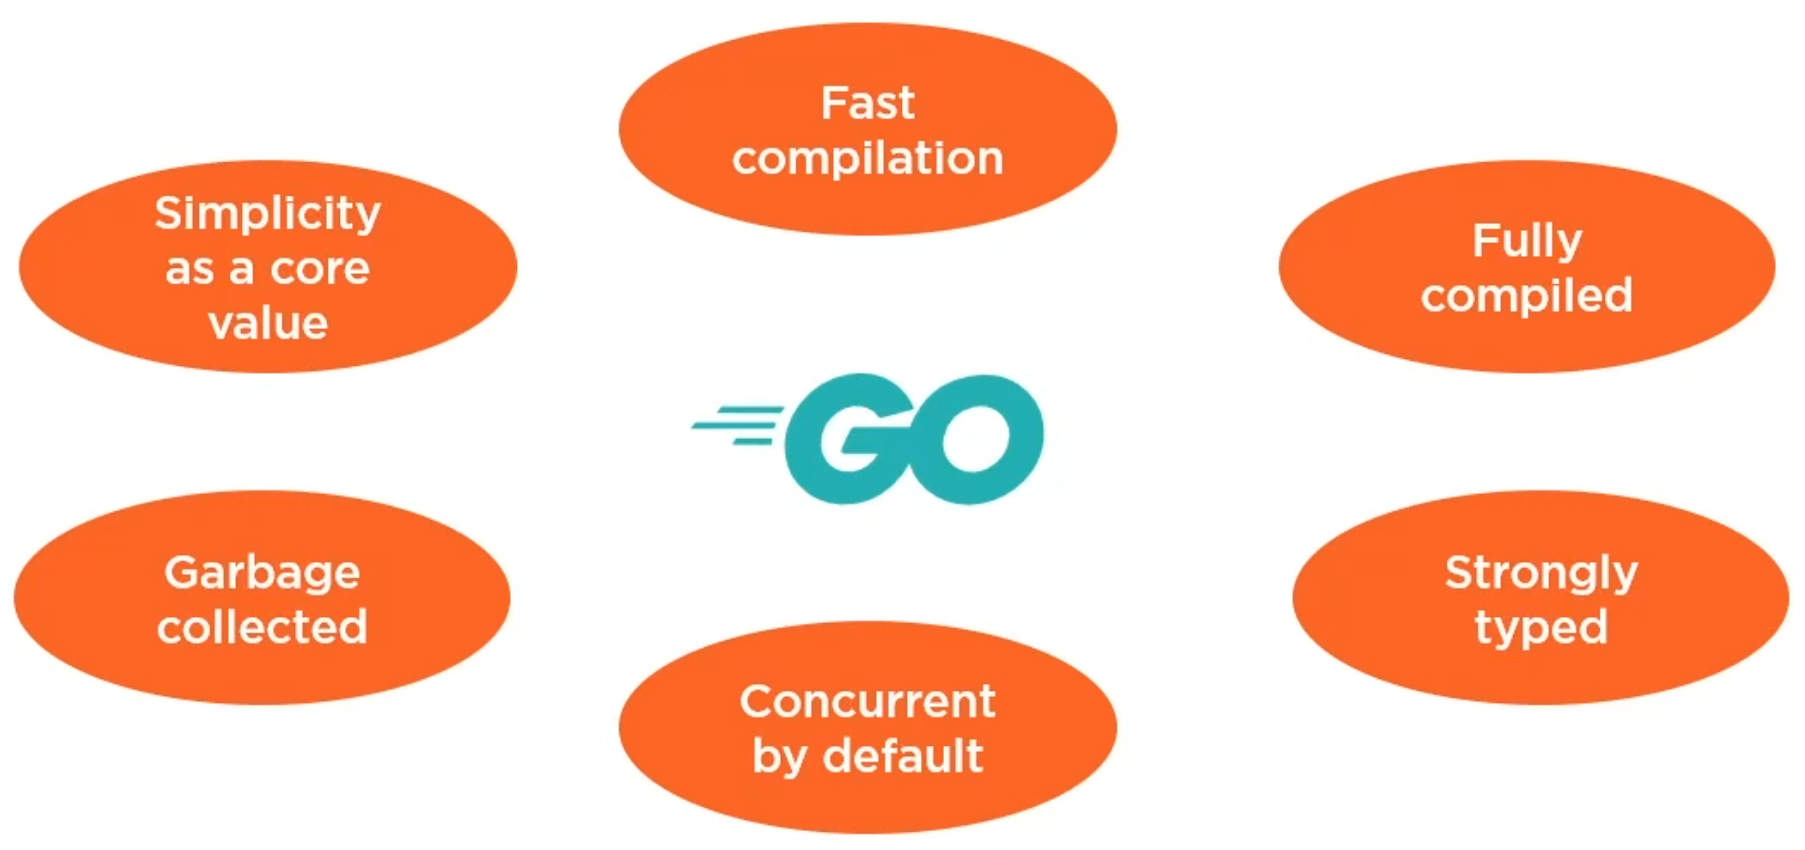 Some features of Go